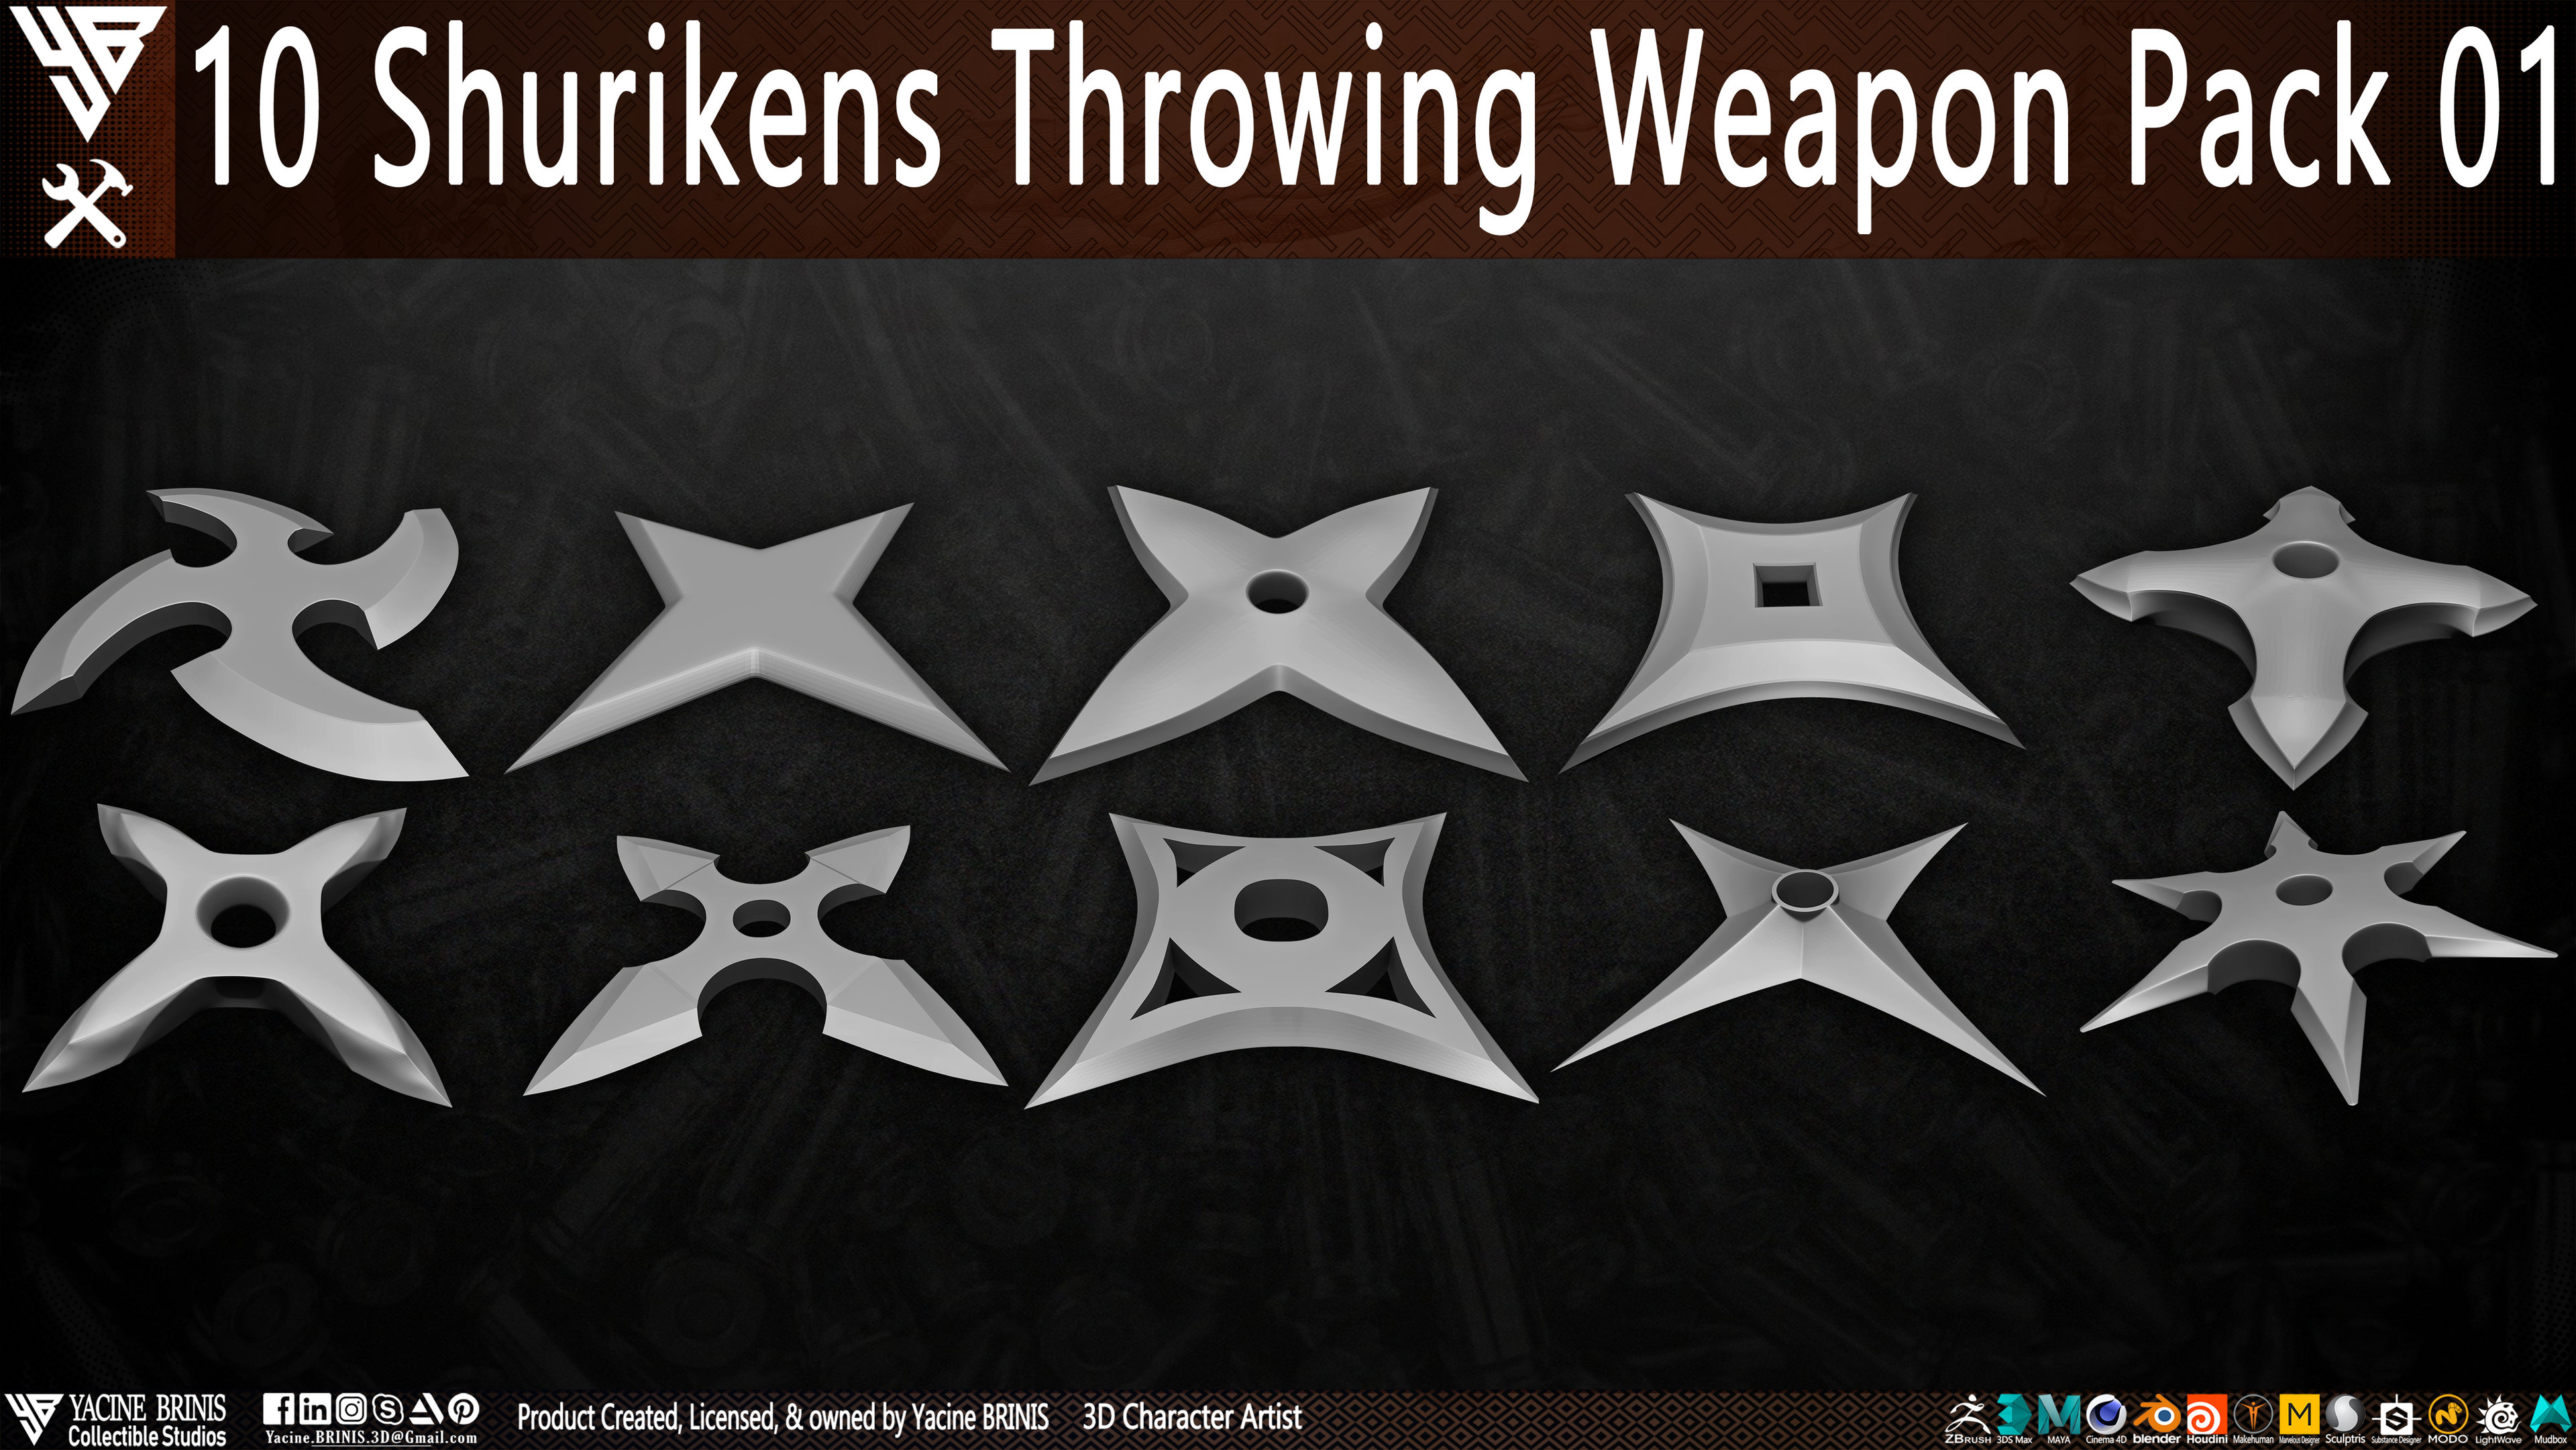 10 Shurikens Throwing Weapon Pack 01 sculpted by Yacine BRINIS Set 04